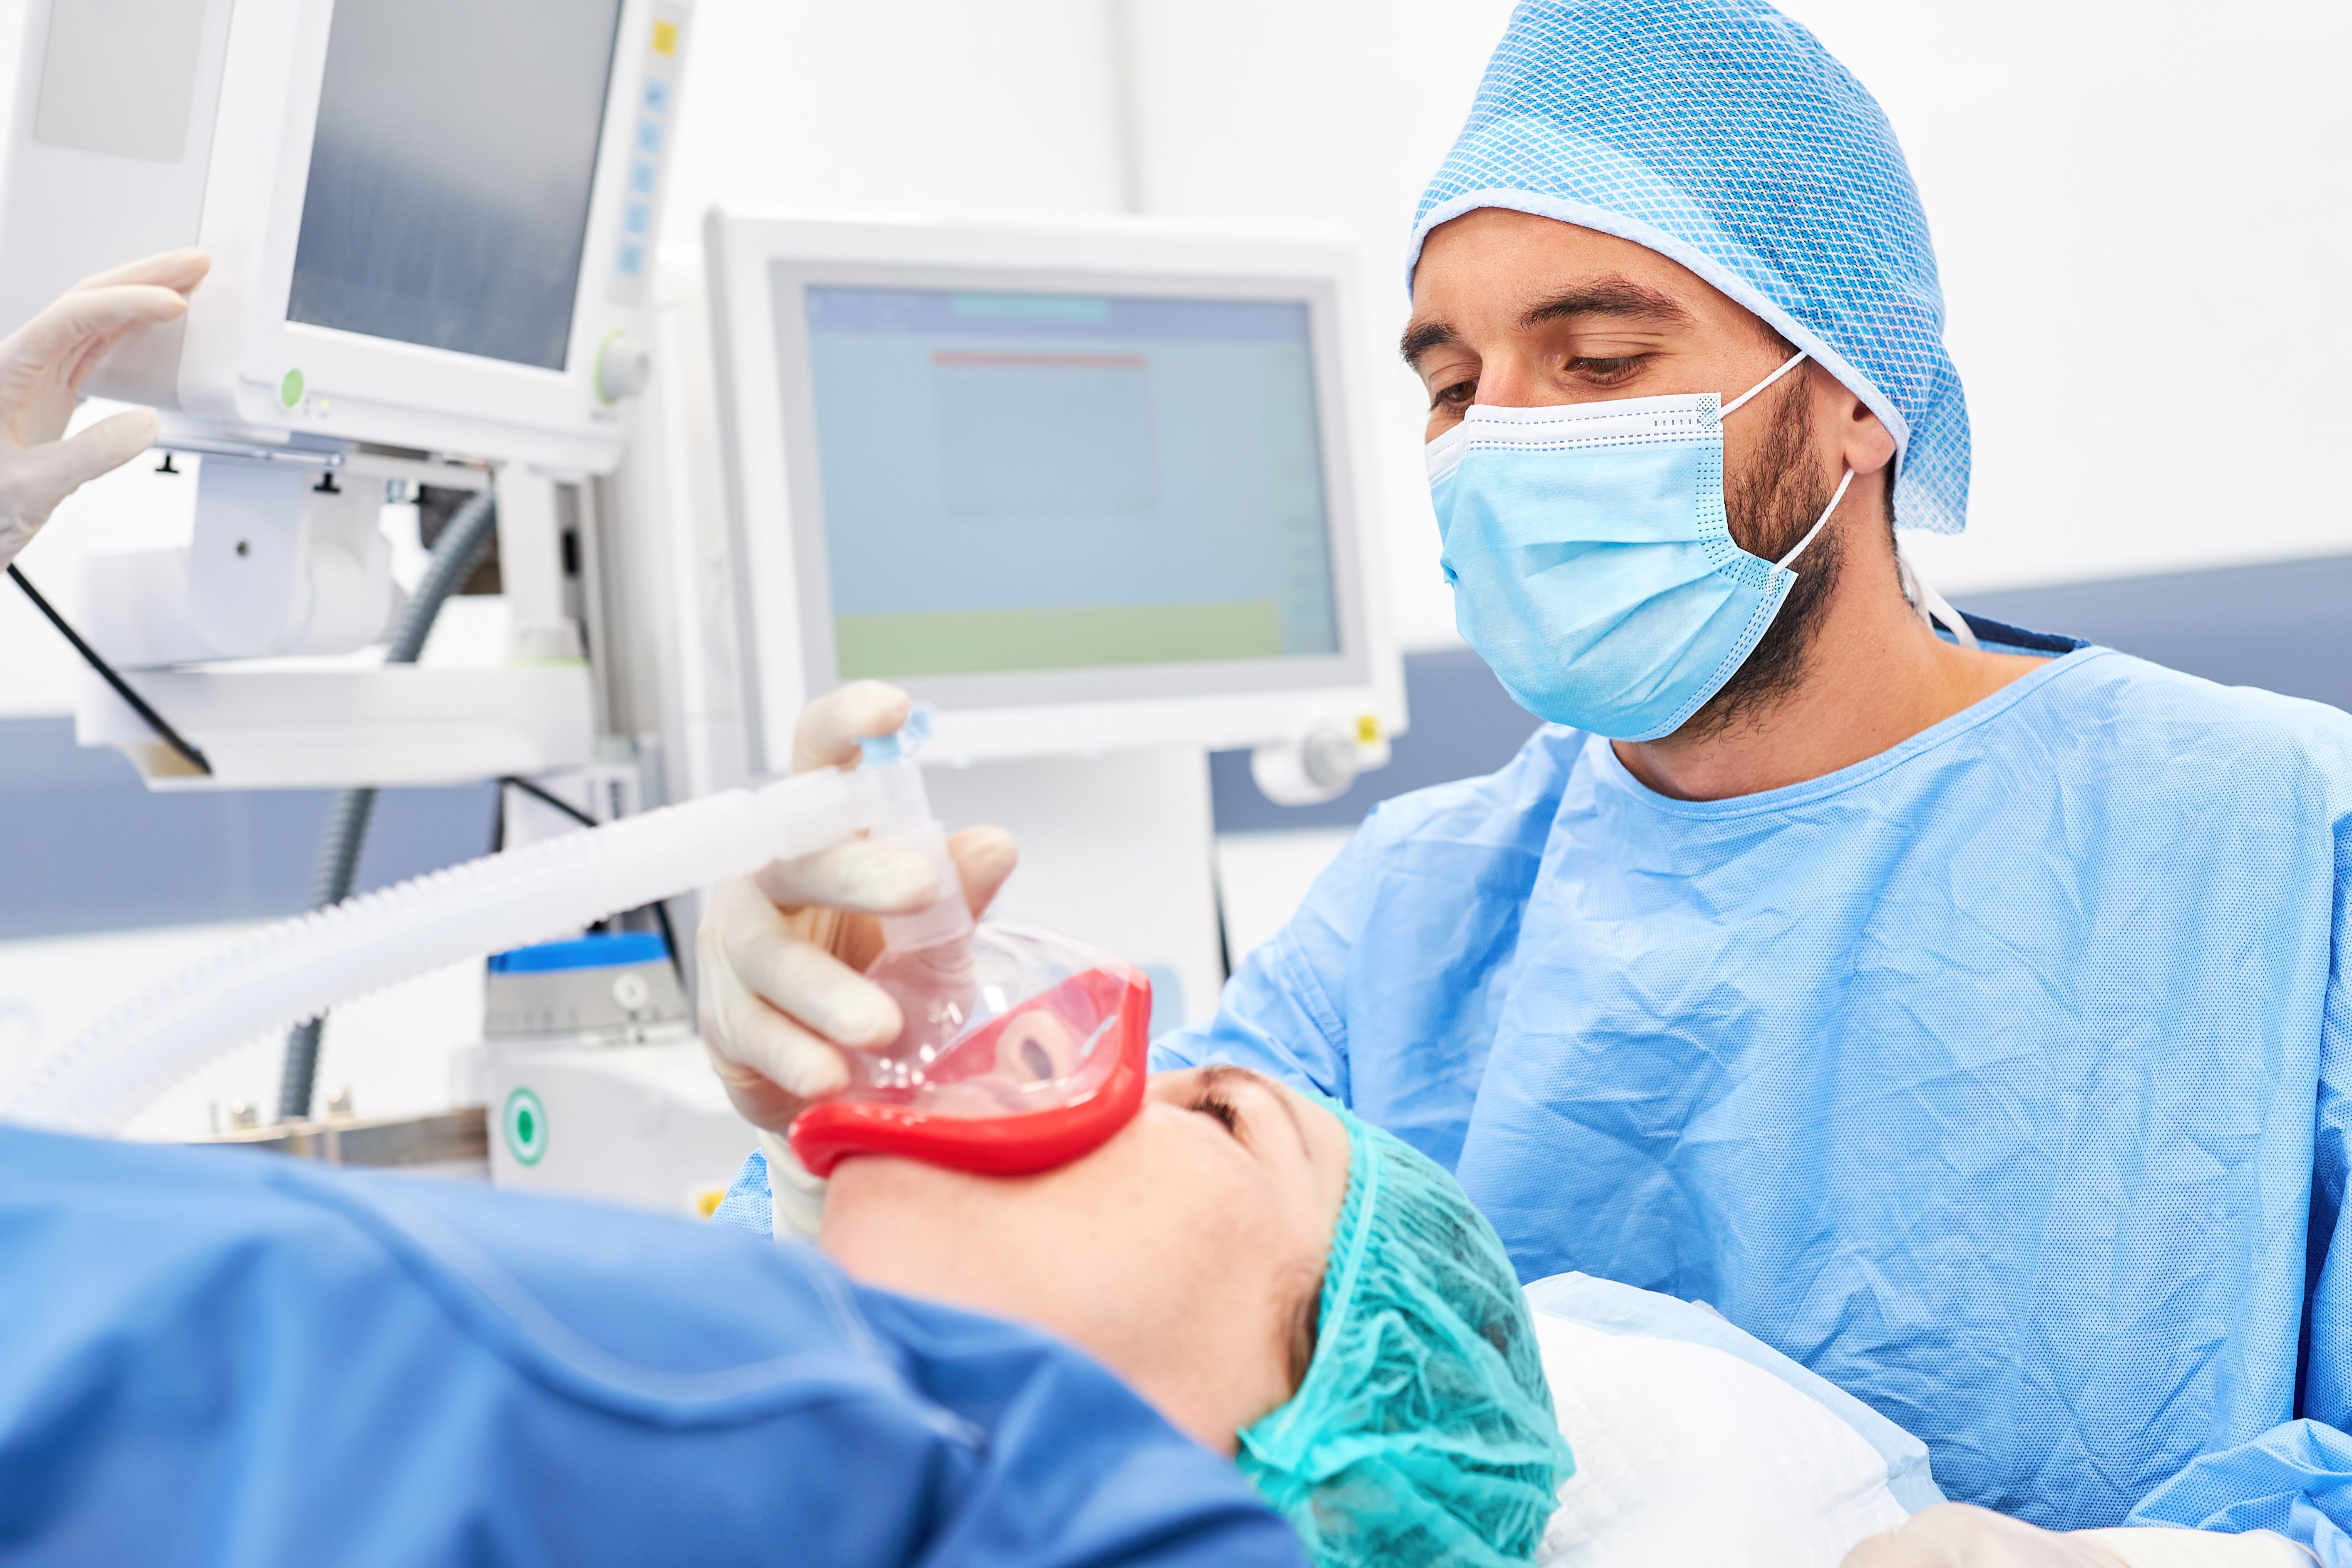 Anesthesiologist,Gives,Patient,Anesthesia,Treatment,For,General,Anesthesia,Before,Surgery